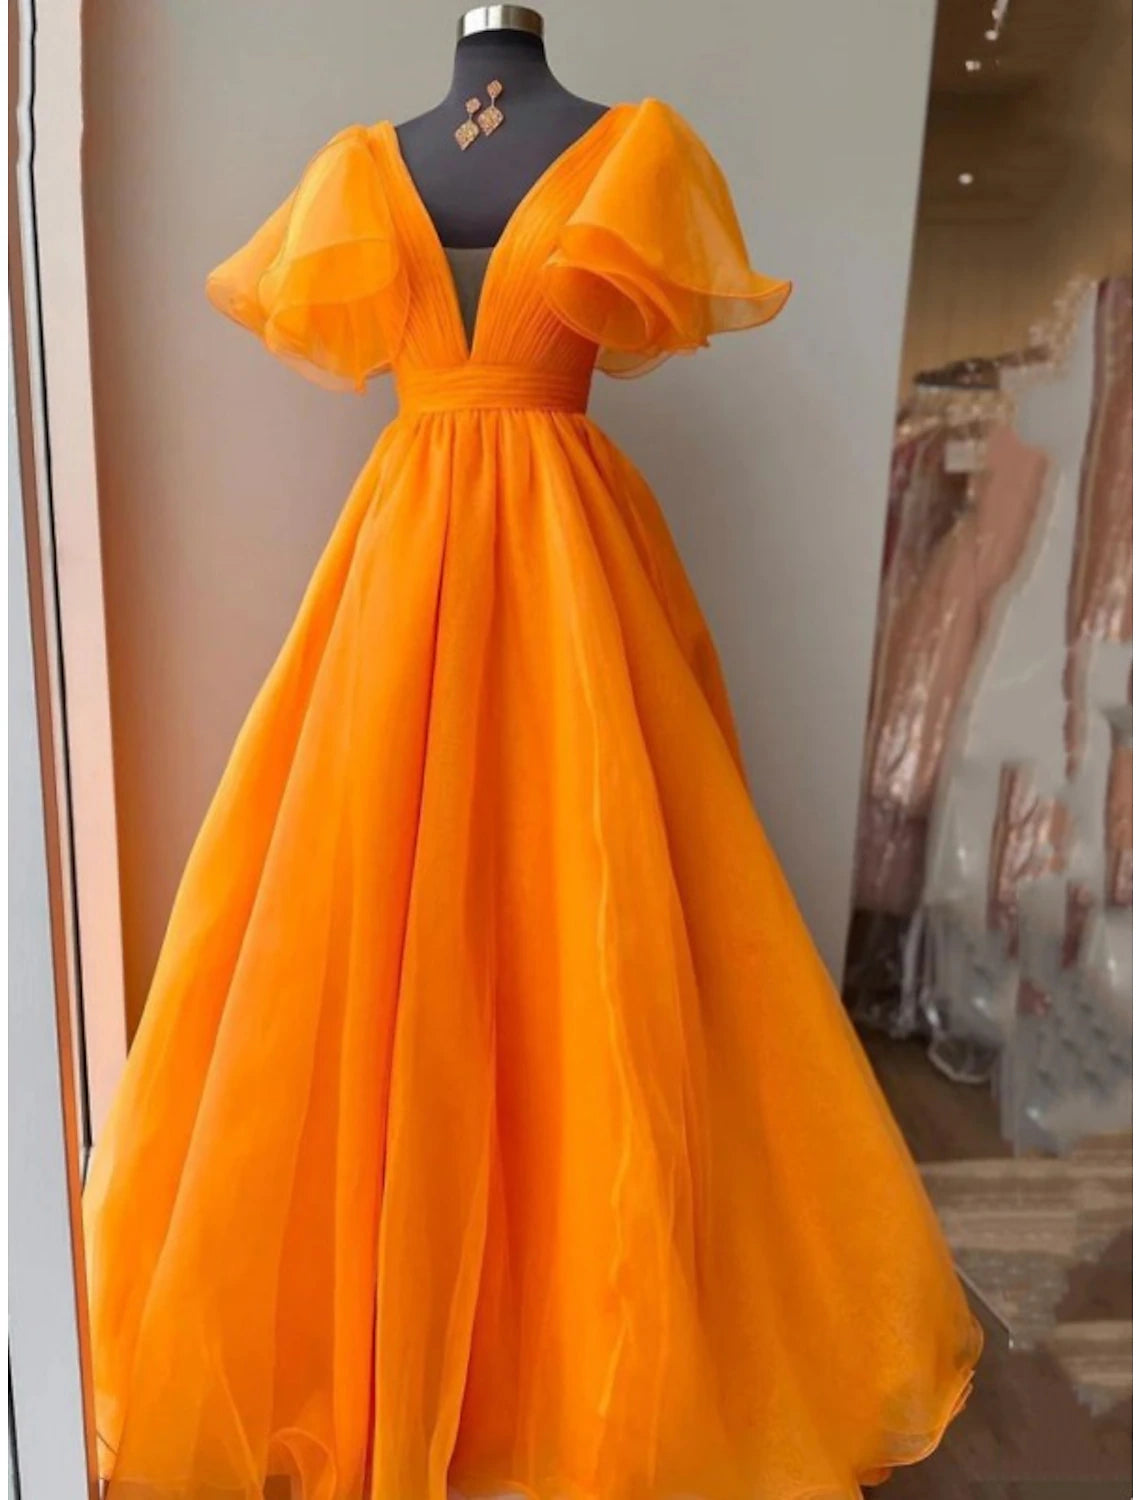 Ball Gown Evening Gown Celebrity Style Dress Wedding Party Dress Floor Length Short Sleeve V Neck Fall Wedding Guest Organza with Pleats Ruffles